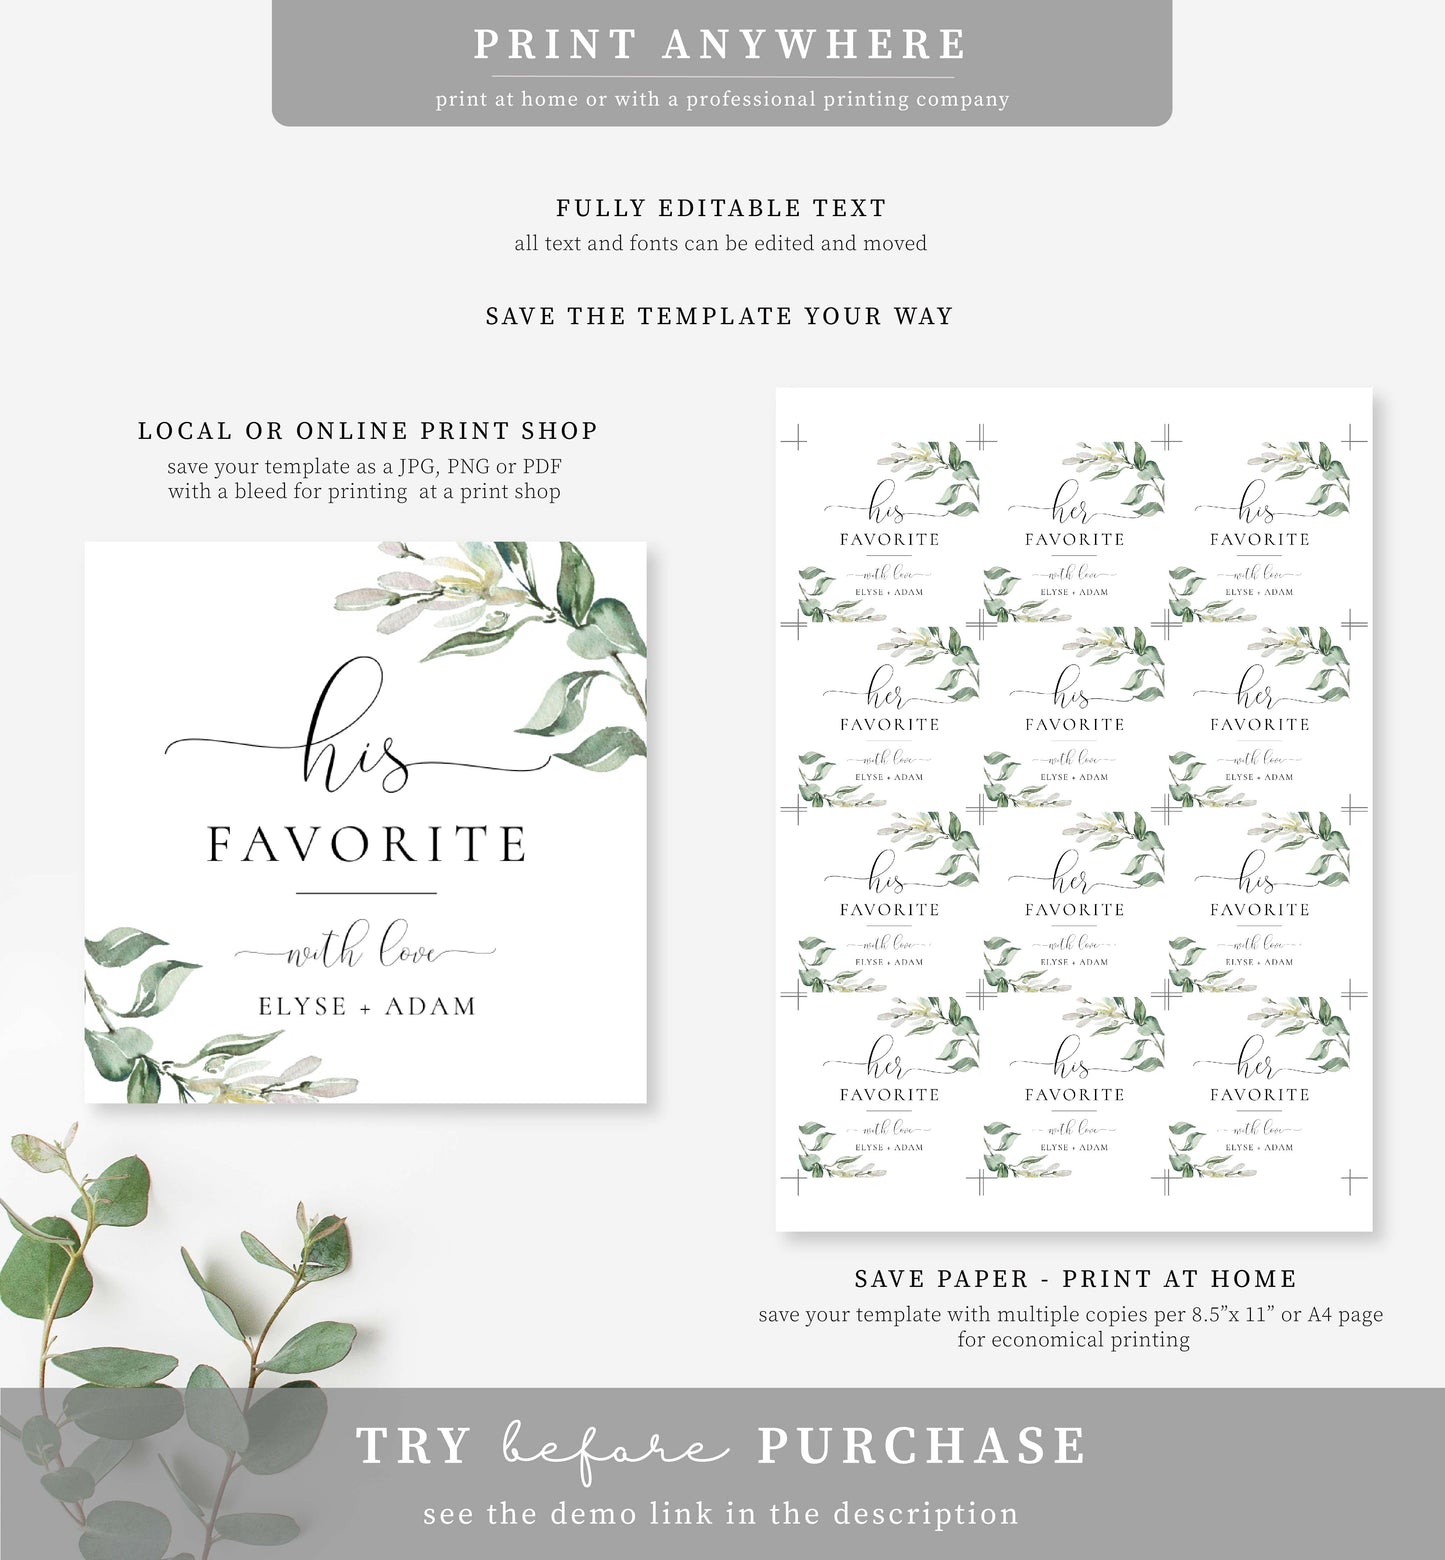 Muted Greenery White | Printable His & Her Favourite Favour Tag Template